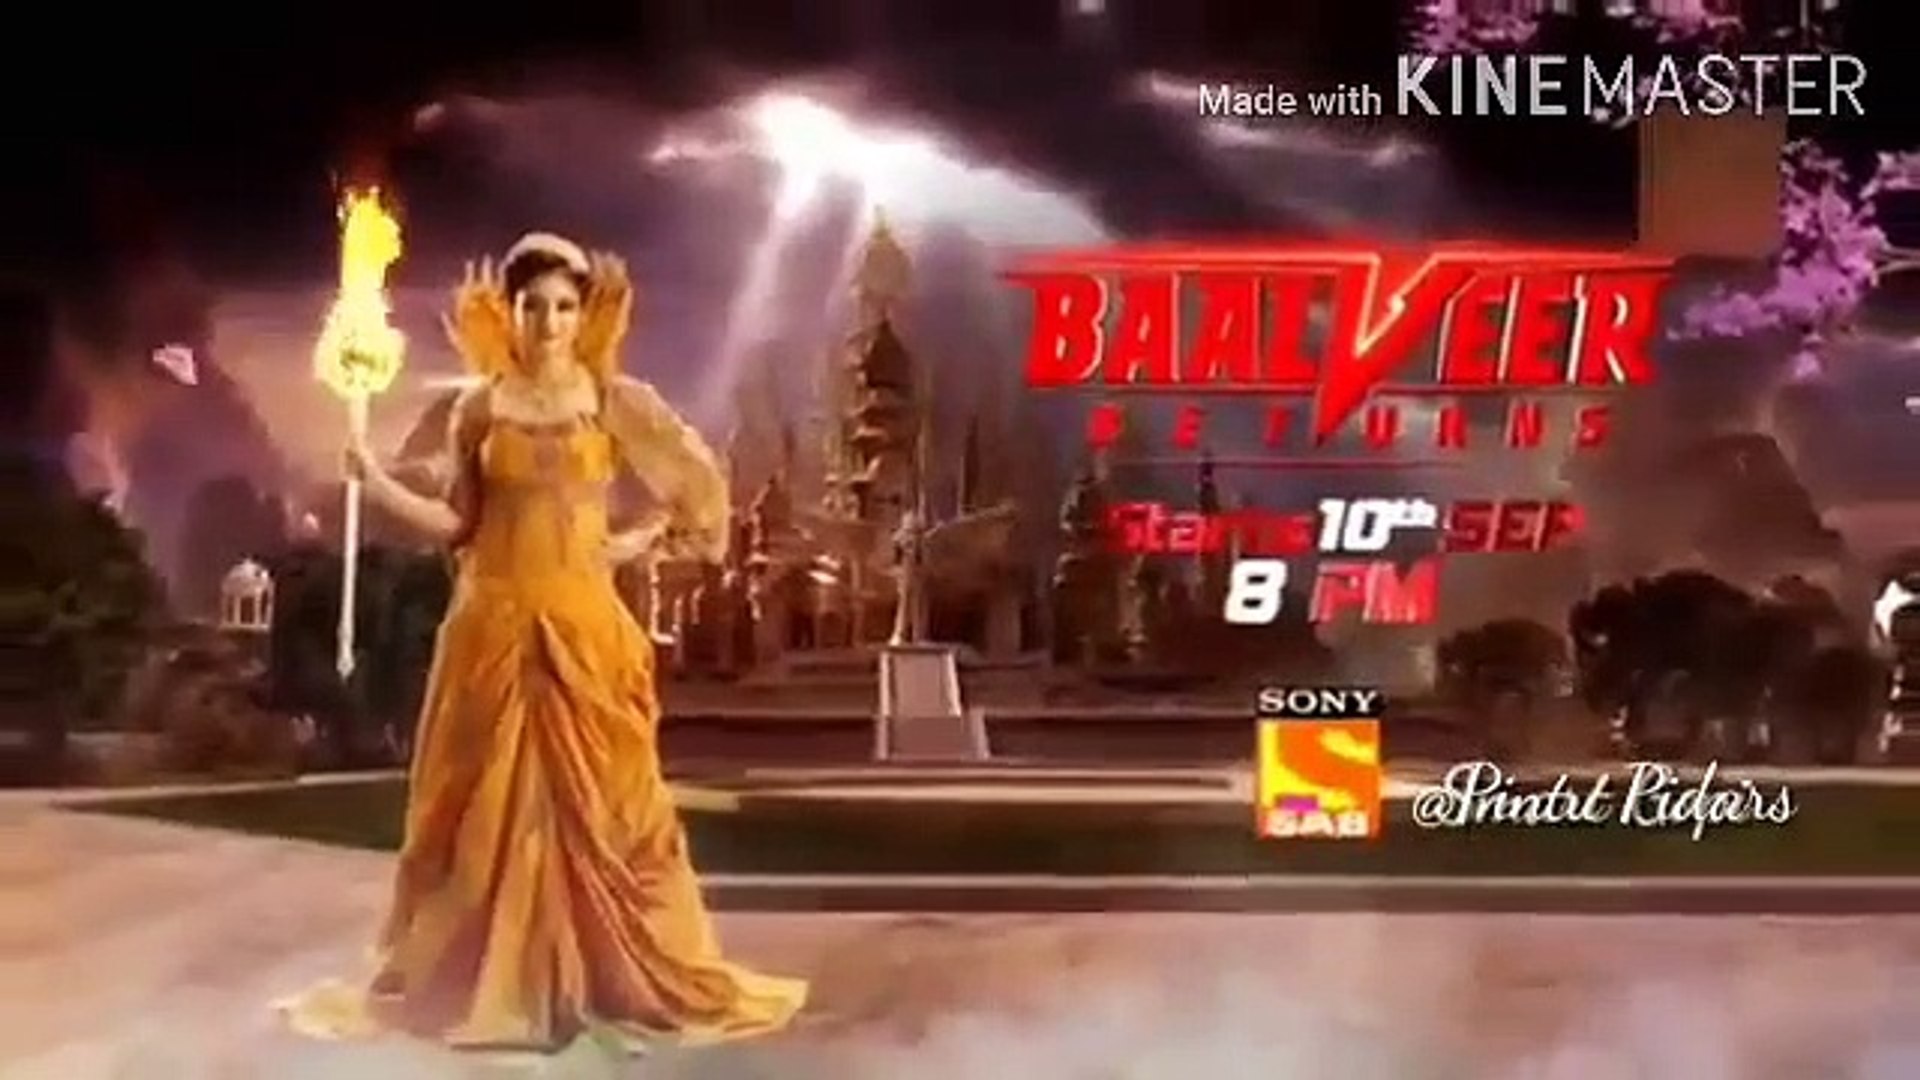 Baalveer | Baal veer | Baal veer returns | Baalveer baalveer | Baalveer  bachcho ko bachane wala baalveer | part 9 - video Dailymotion